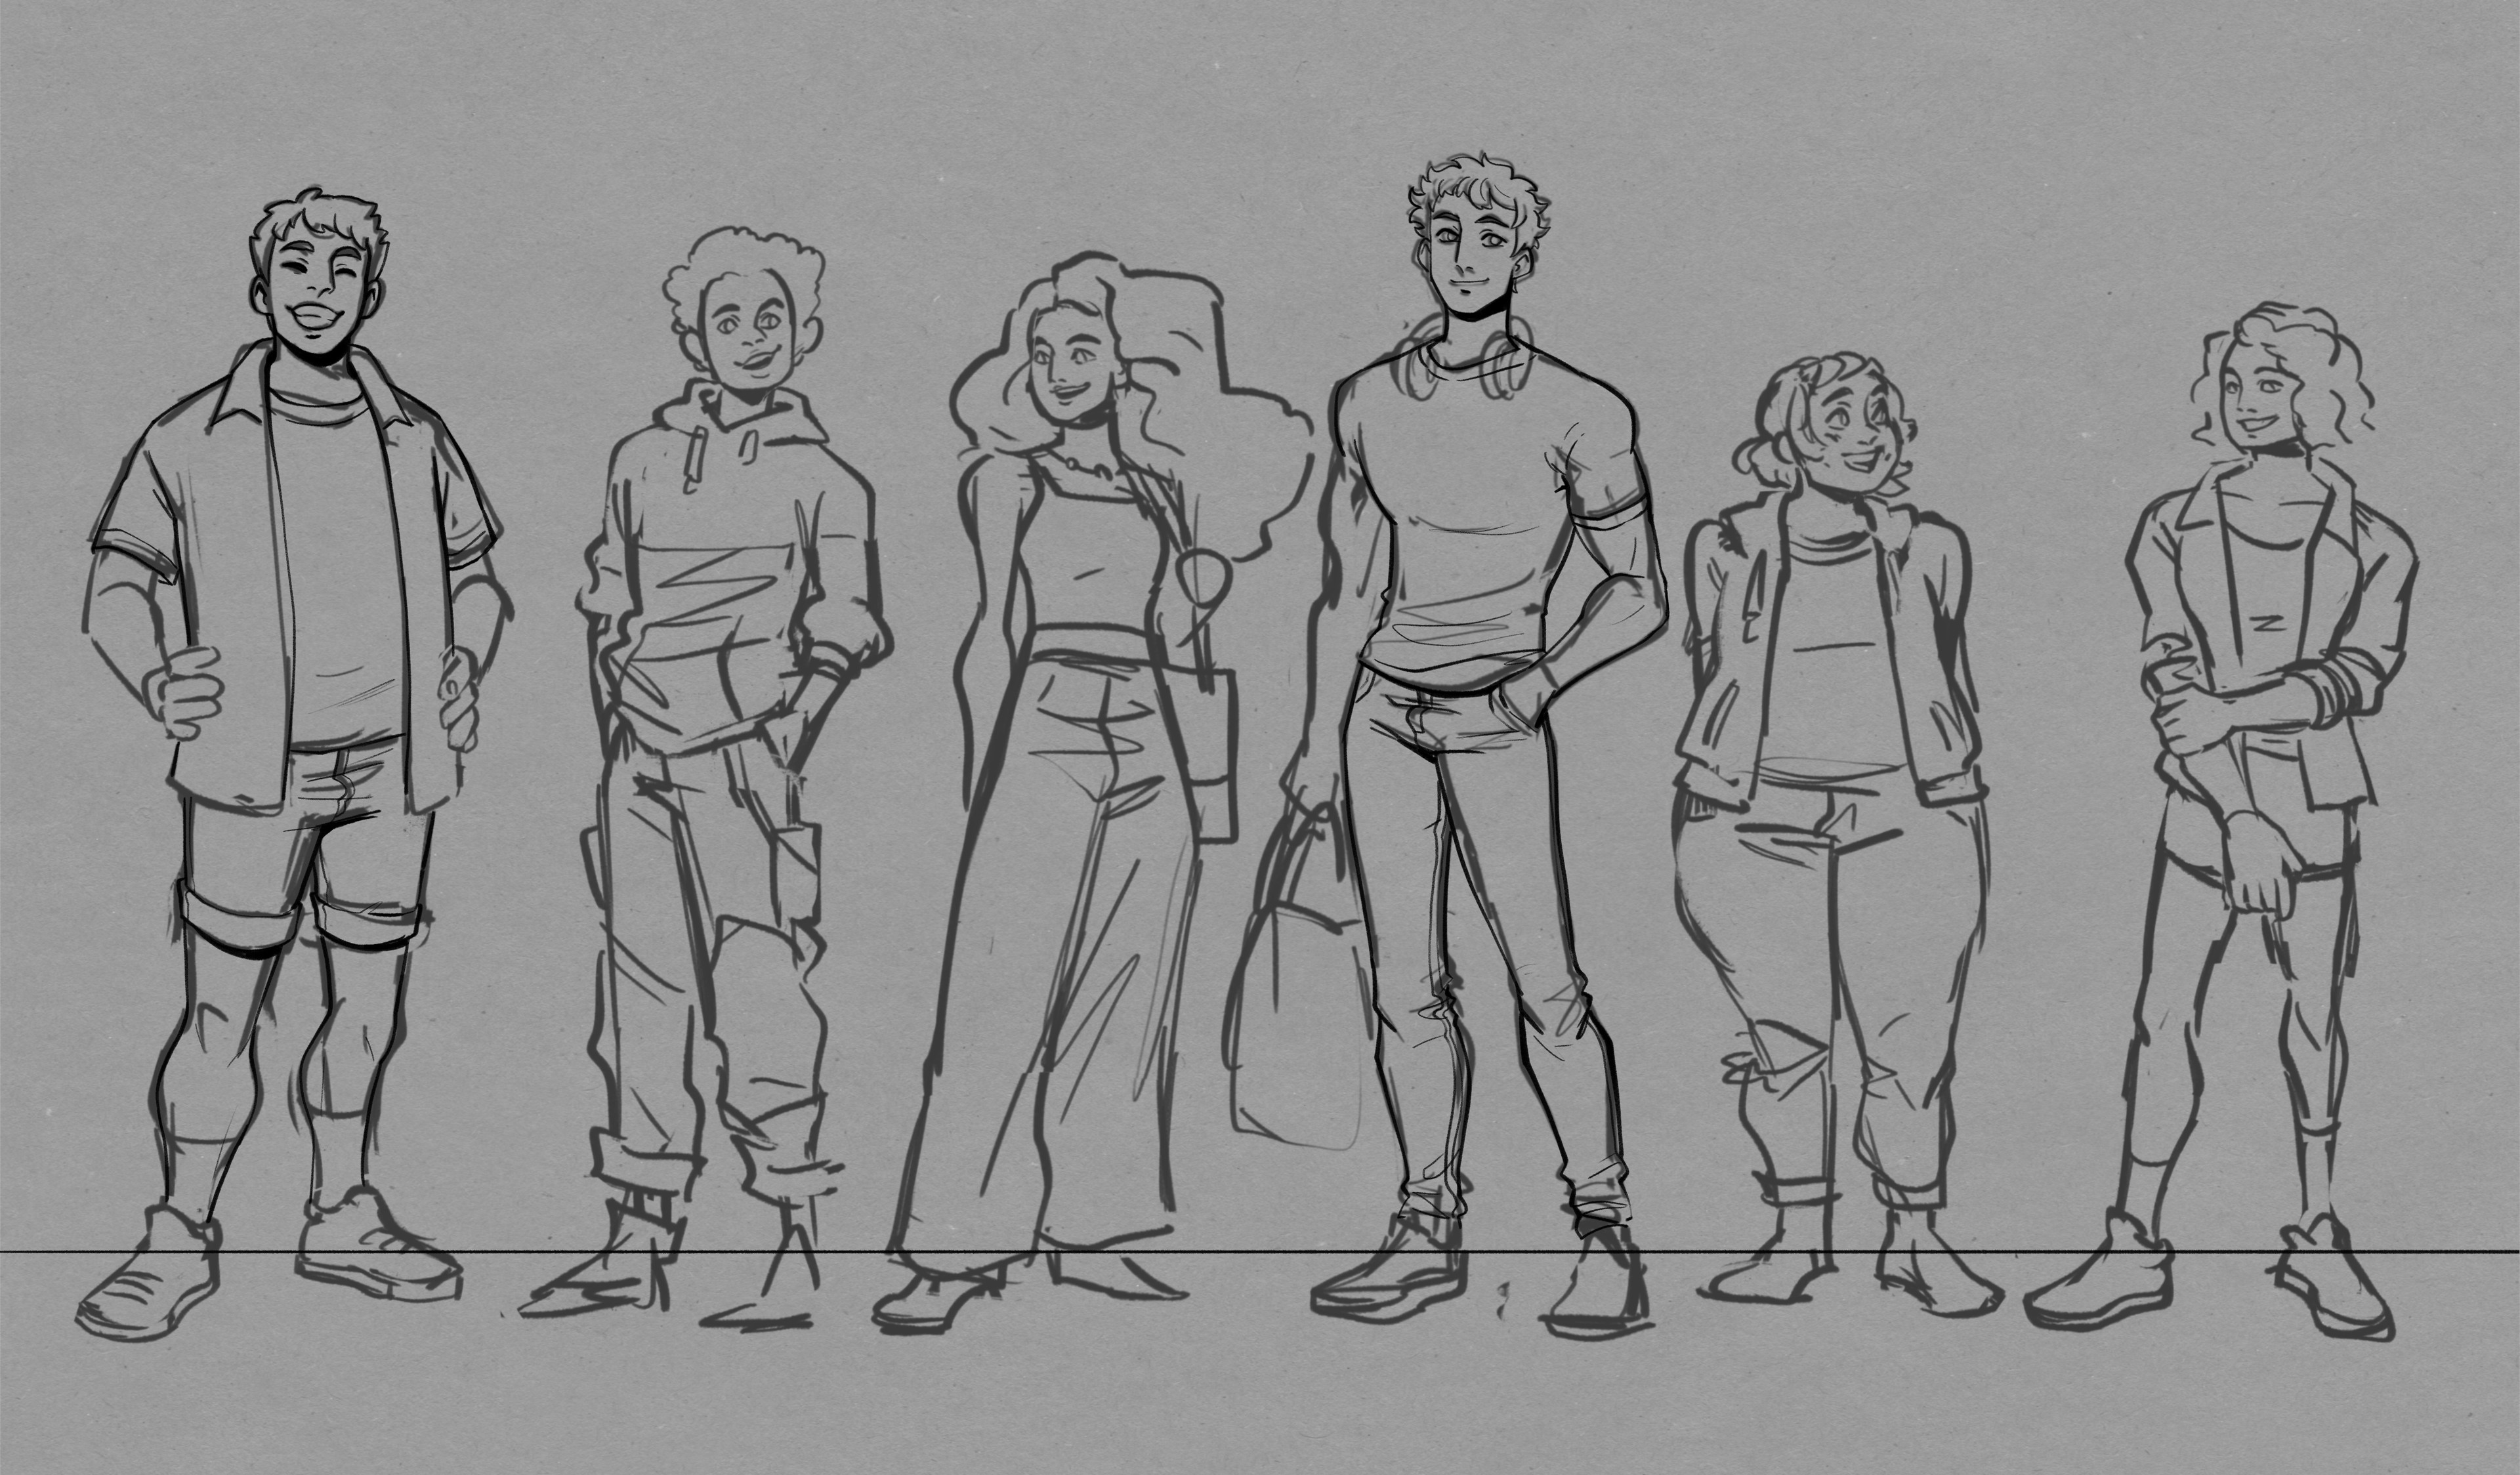 A quick lineup to check on everybody’s silhouettes, we were trying to have a large variety of body shapes and have at least one character that you could connect with or see yourself represented. 